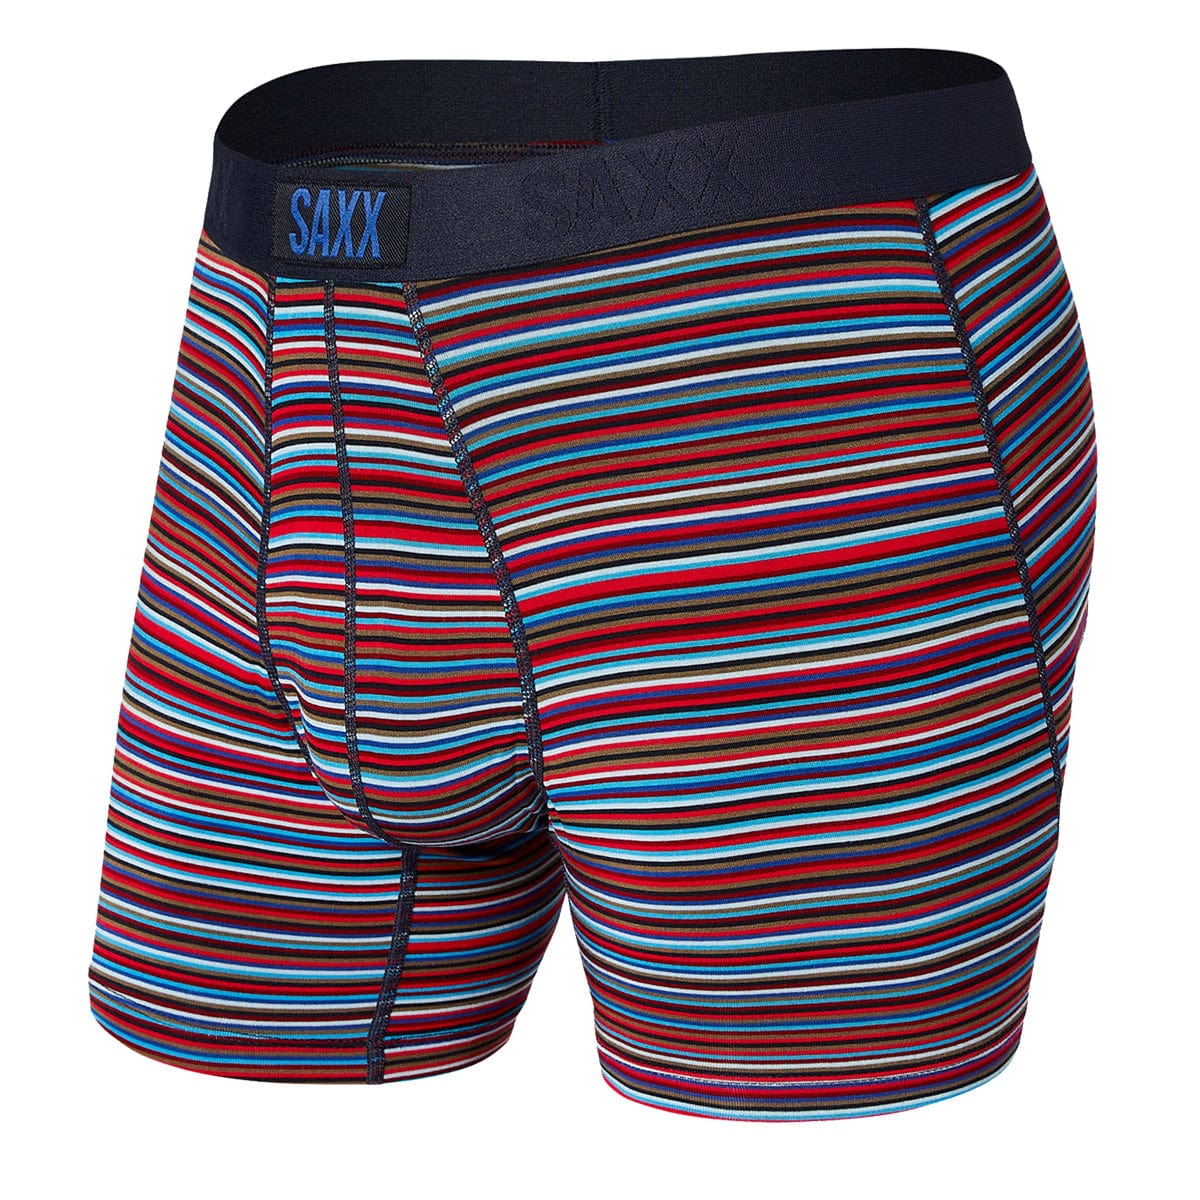 Saxx Vibe Boxers - Blue Vibrant Stripe - The Hockey Shop Source For Sports